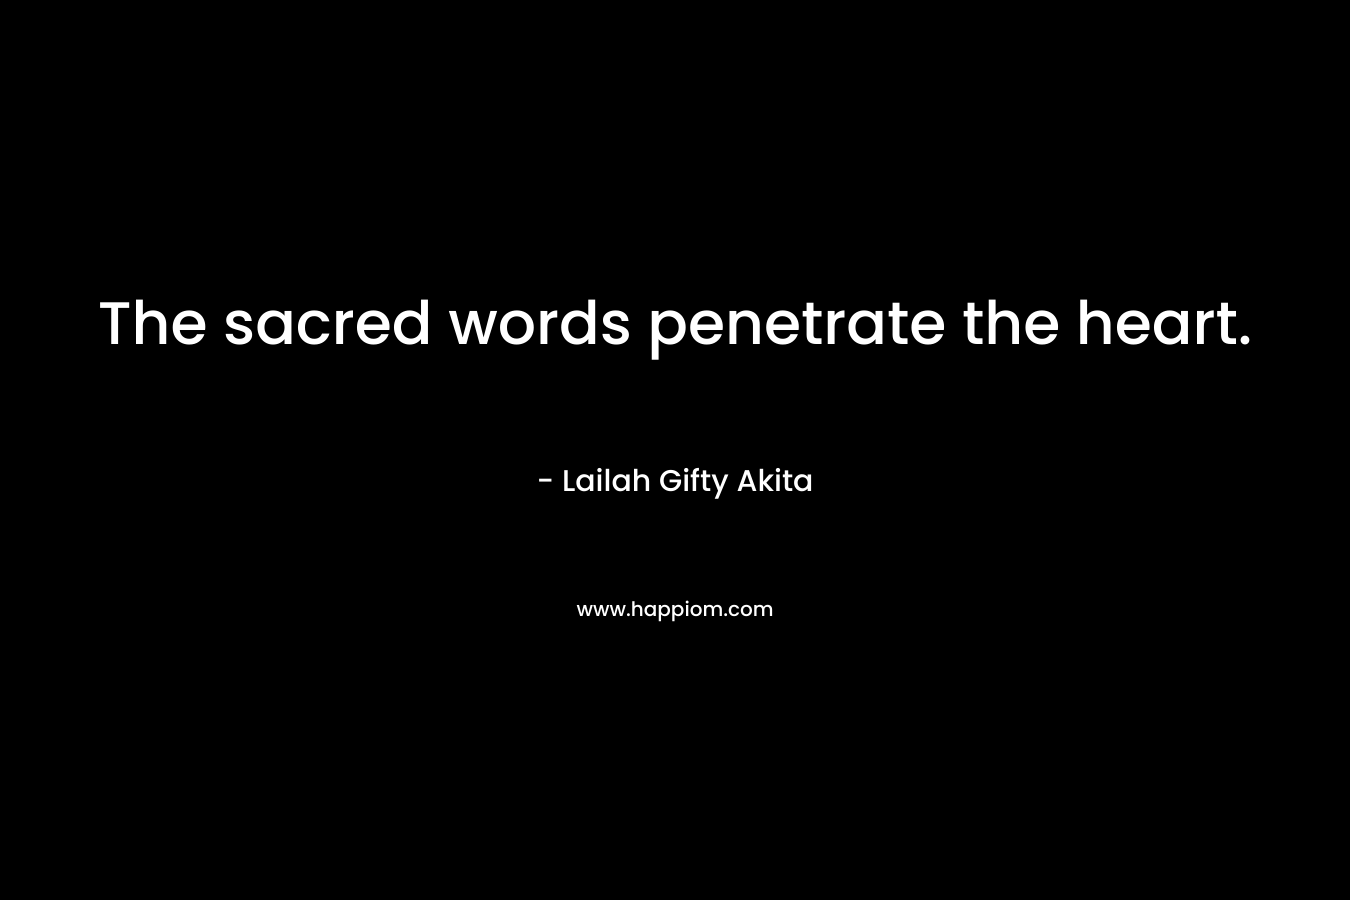 The sacred words penetrate the heart. – Lailah Gifty Akita